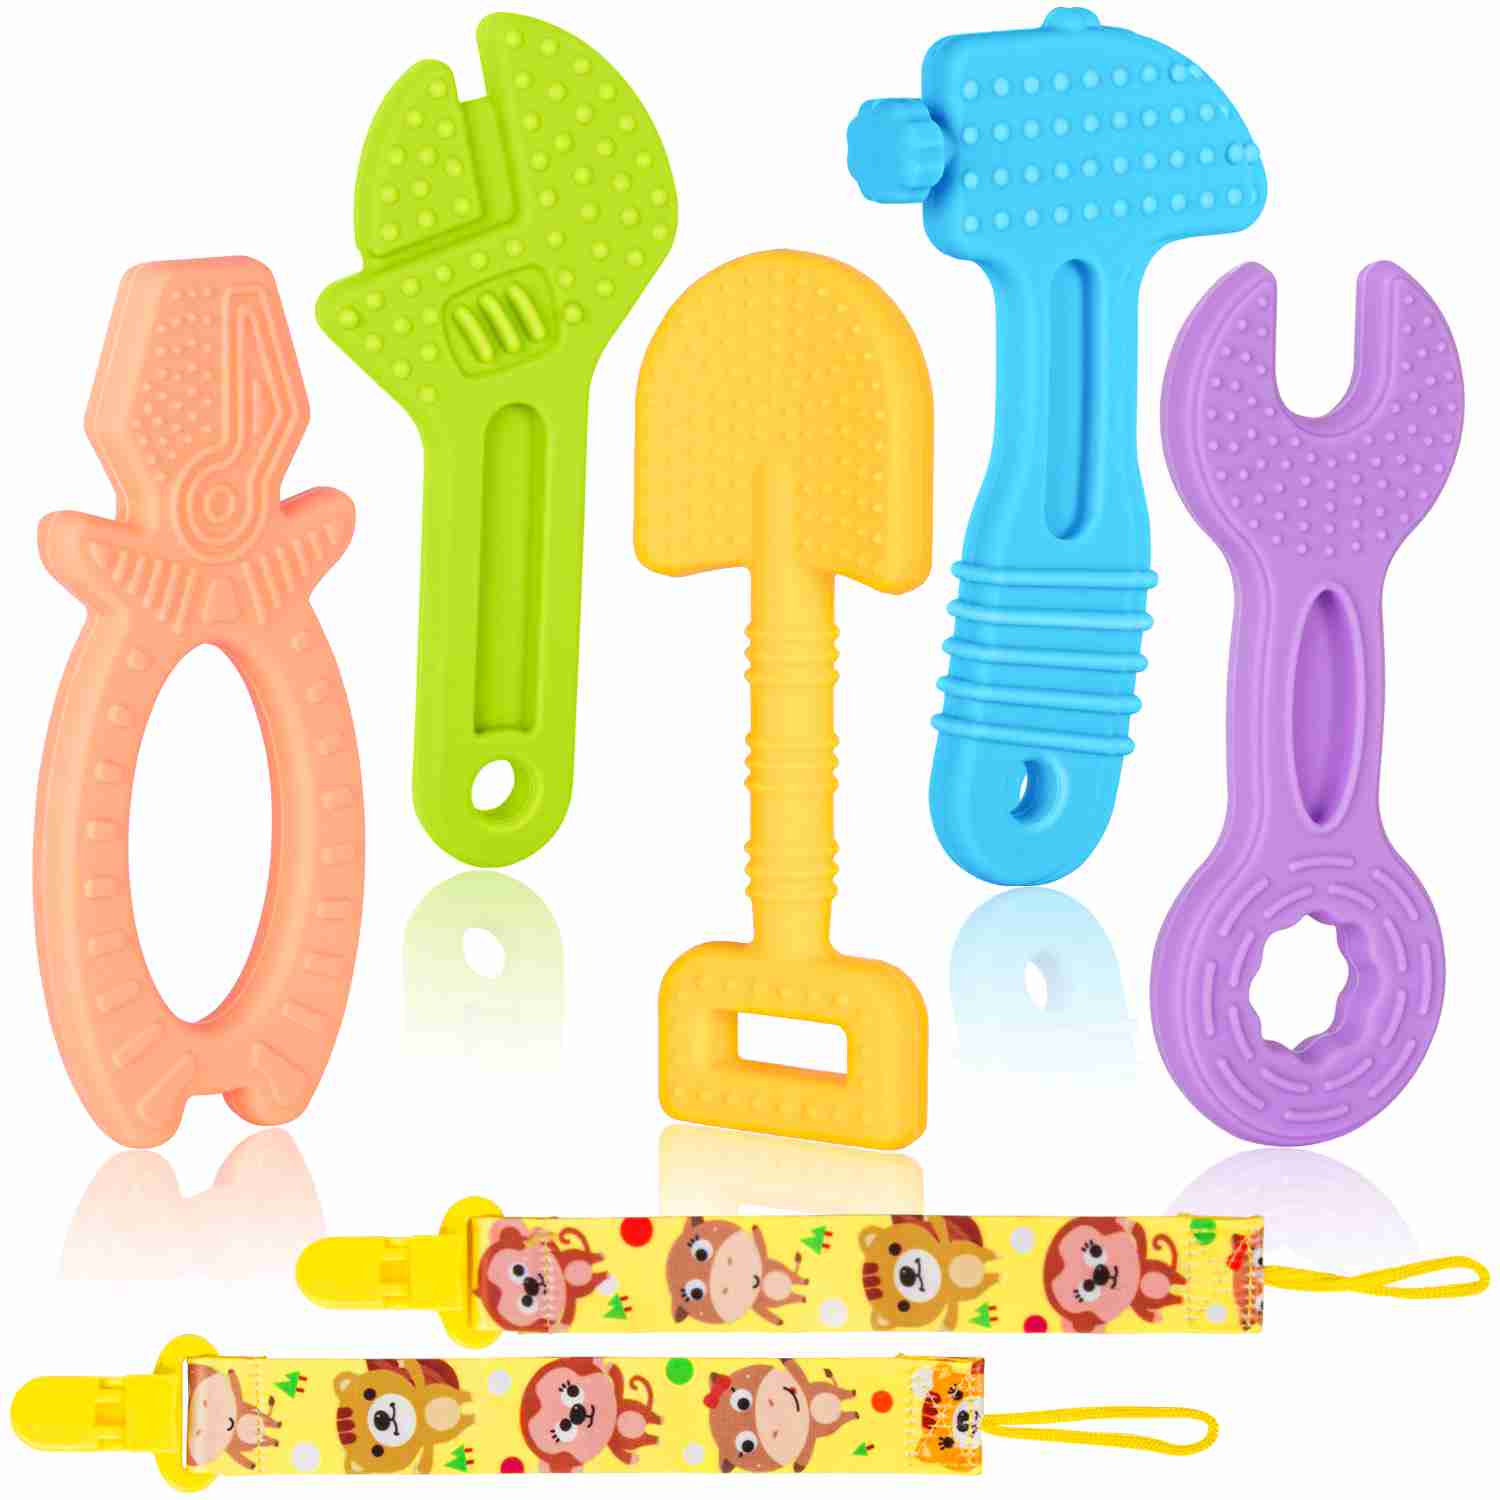 baby-teethers-0-6-months with cash back rebate